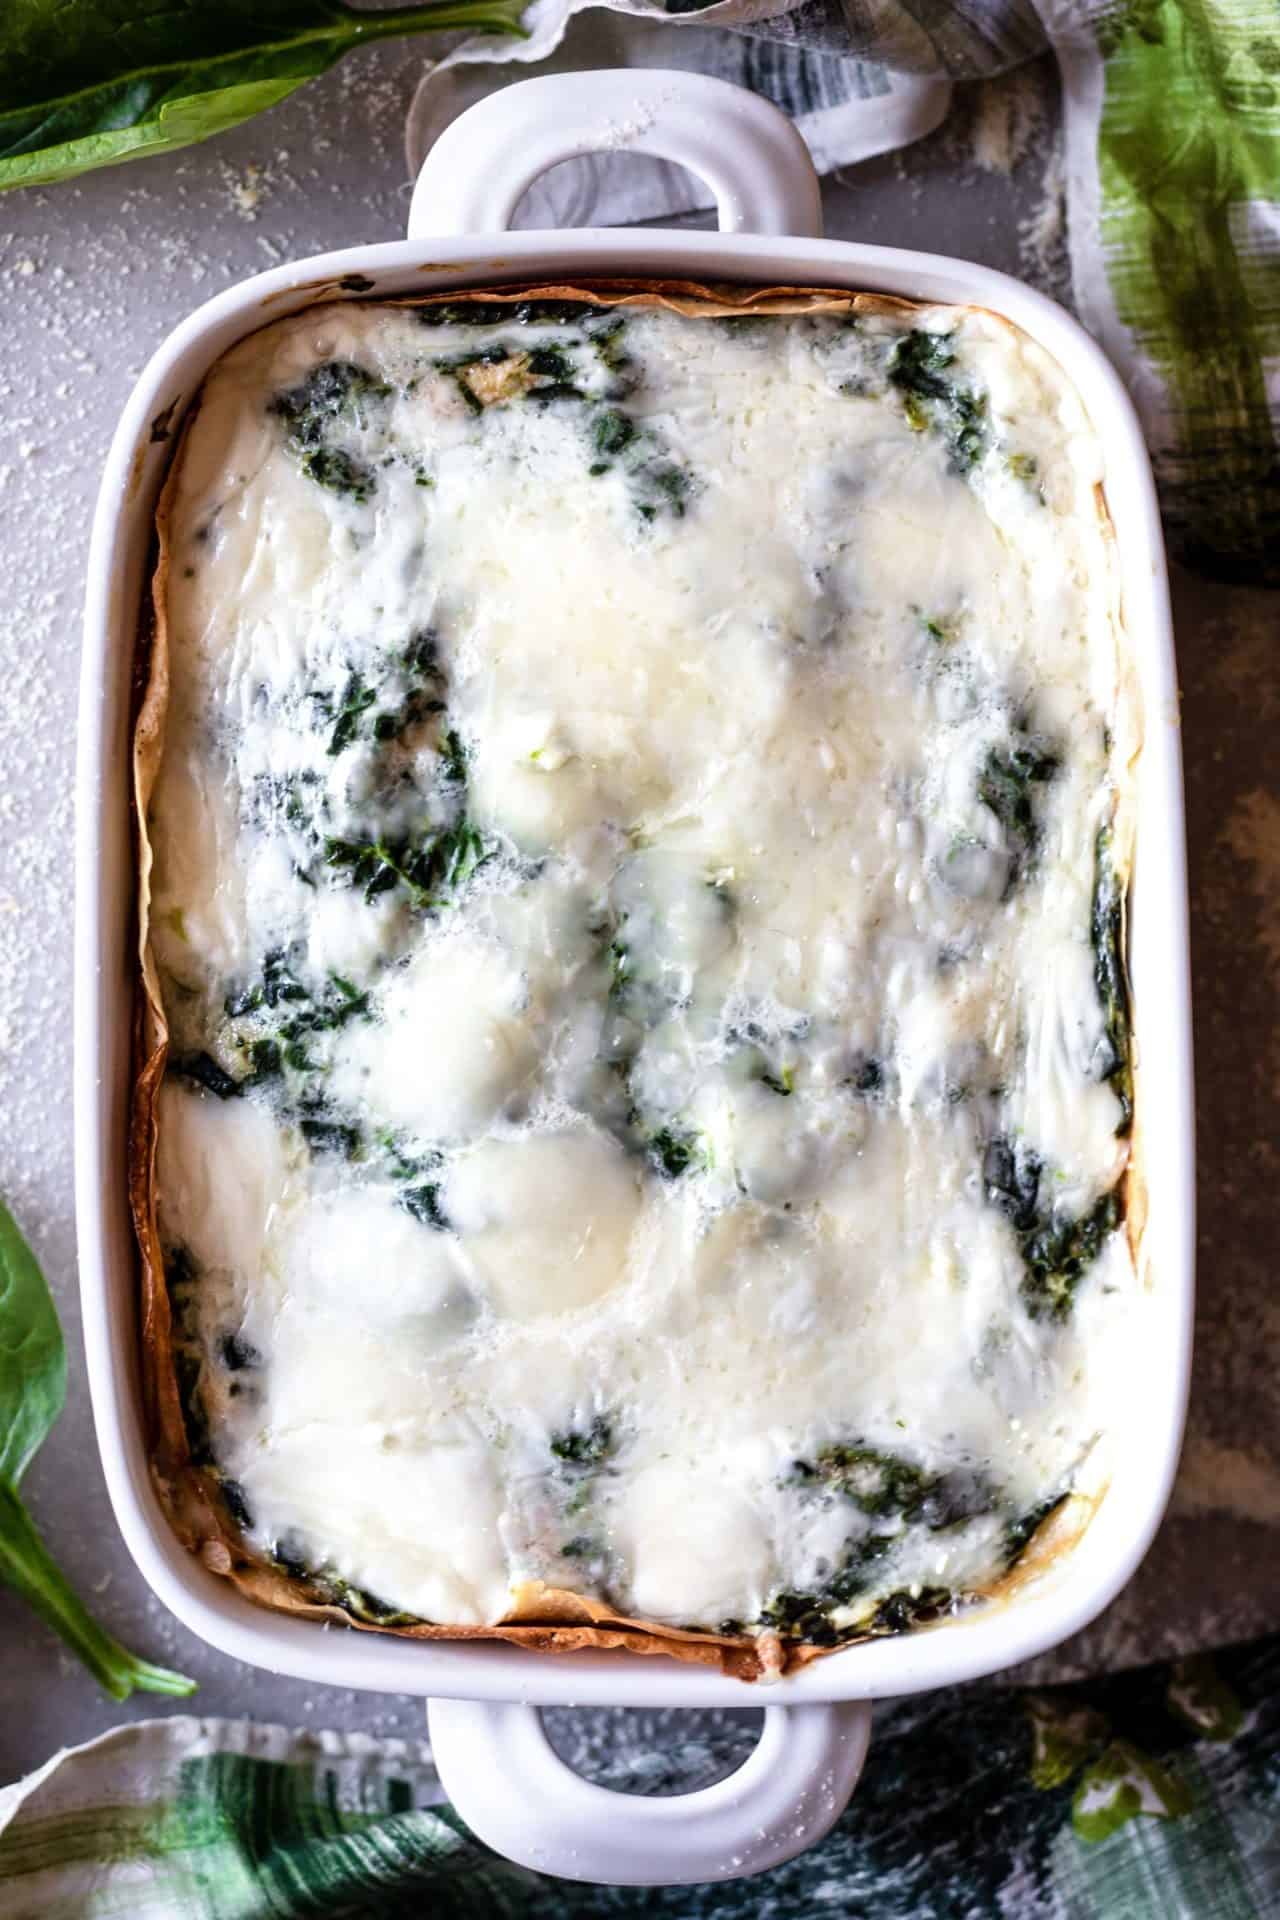 This Crepes Lasagna with Spinach & Ricotta Cheese  is so flavorful, cheesy, spinach infused, super creamy, healthy, very simple to make and beyond delicious! Plus it is completely gluten-free and Low FODMAP.